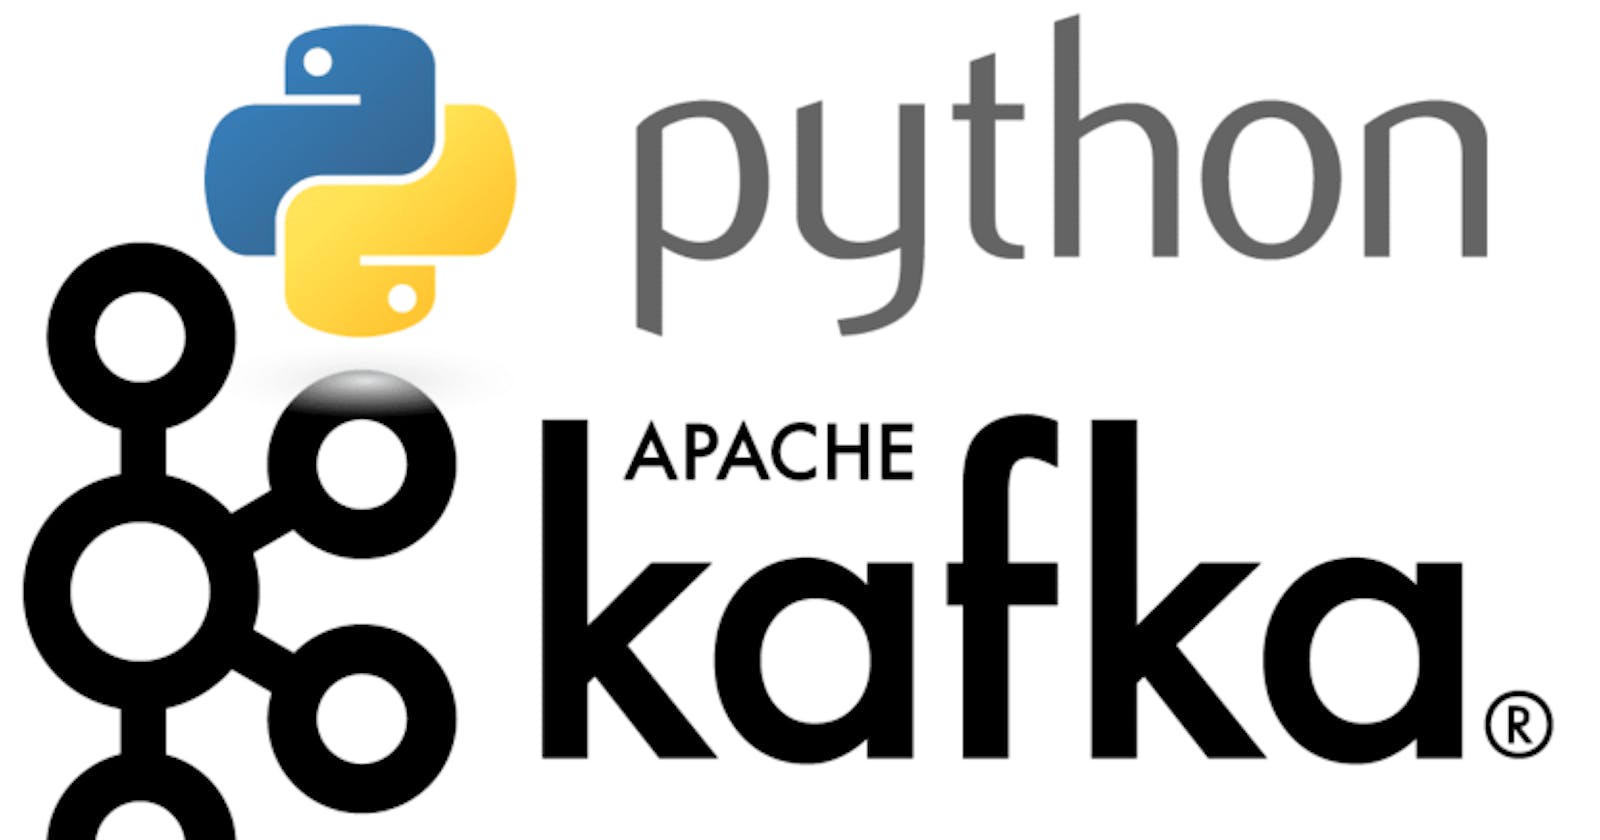 Getting started with Kafka - Twitter Streaming with Apache Kafka